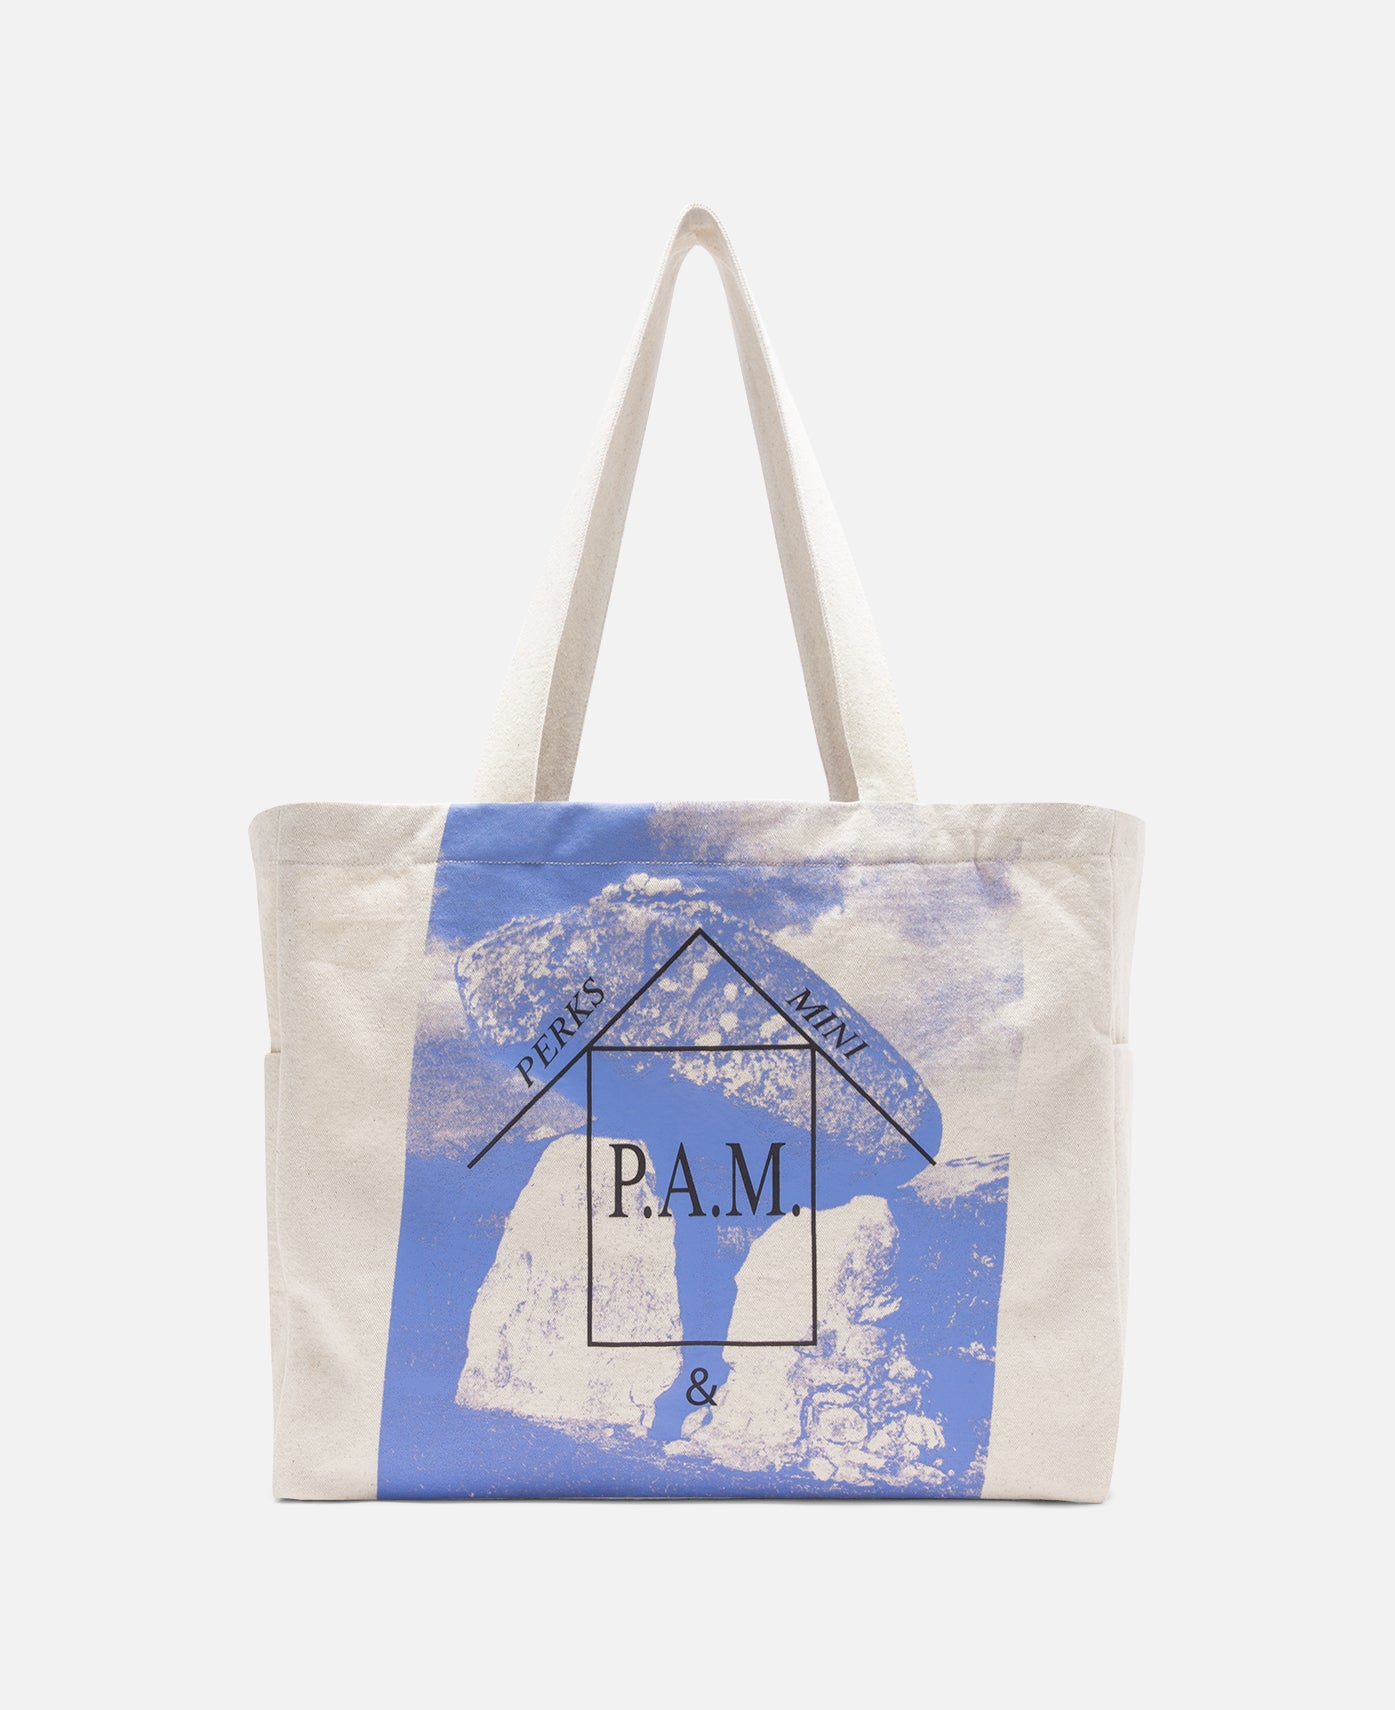 Jim and Pam - White Tote Bag - Frankly Wearing